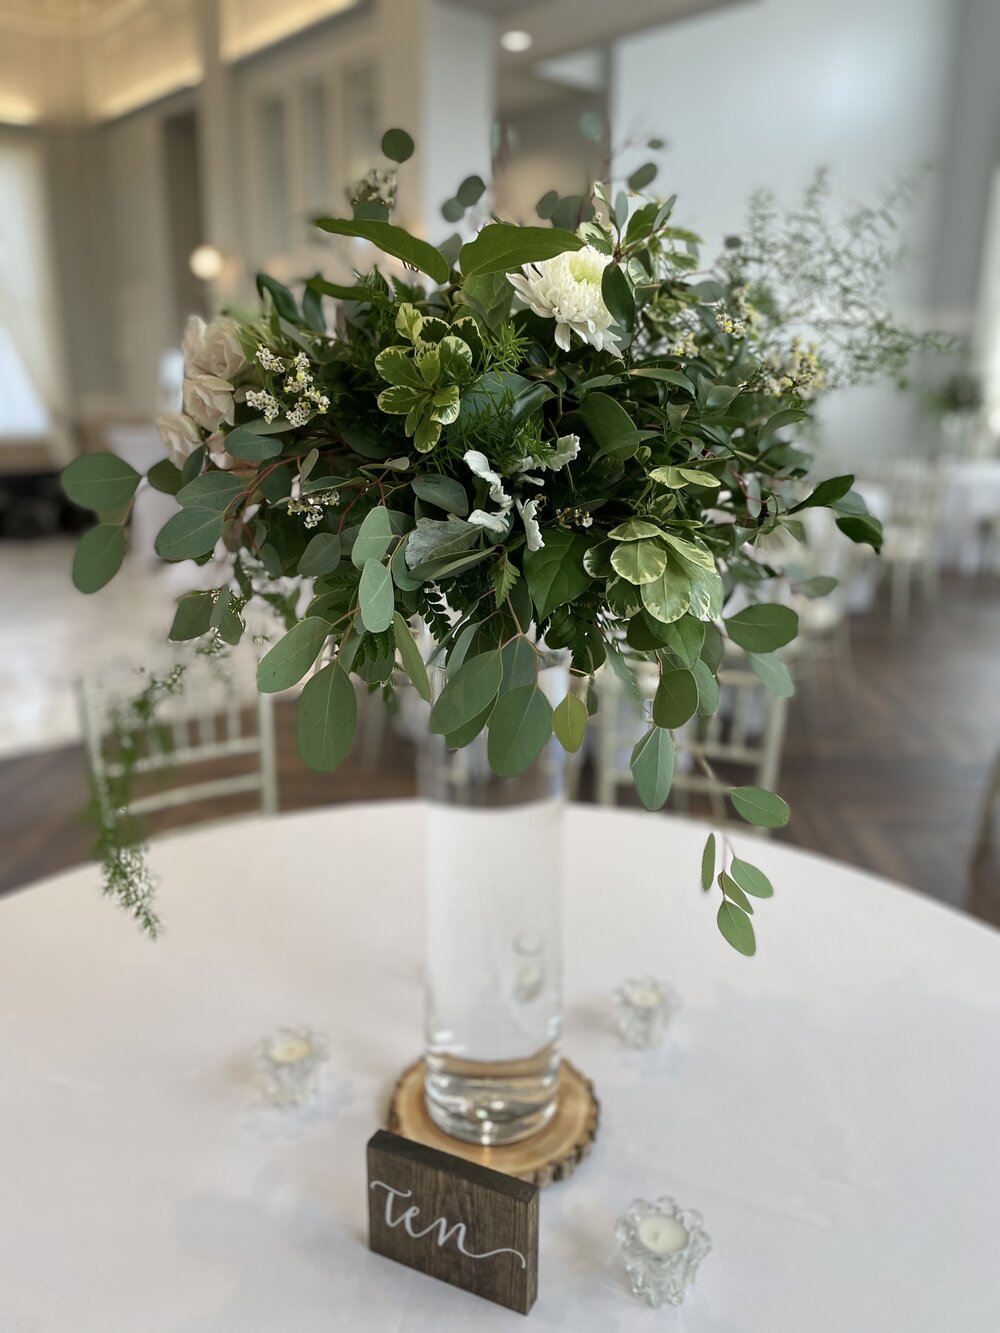 Table centerpiece with greenery and cylinder vase